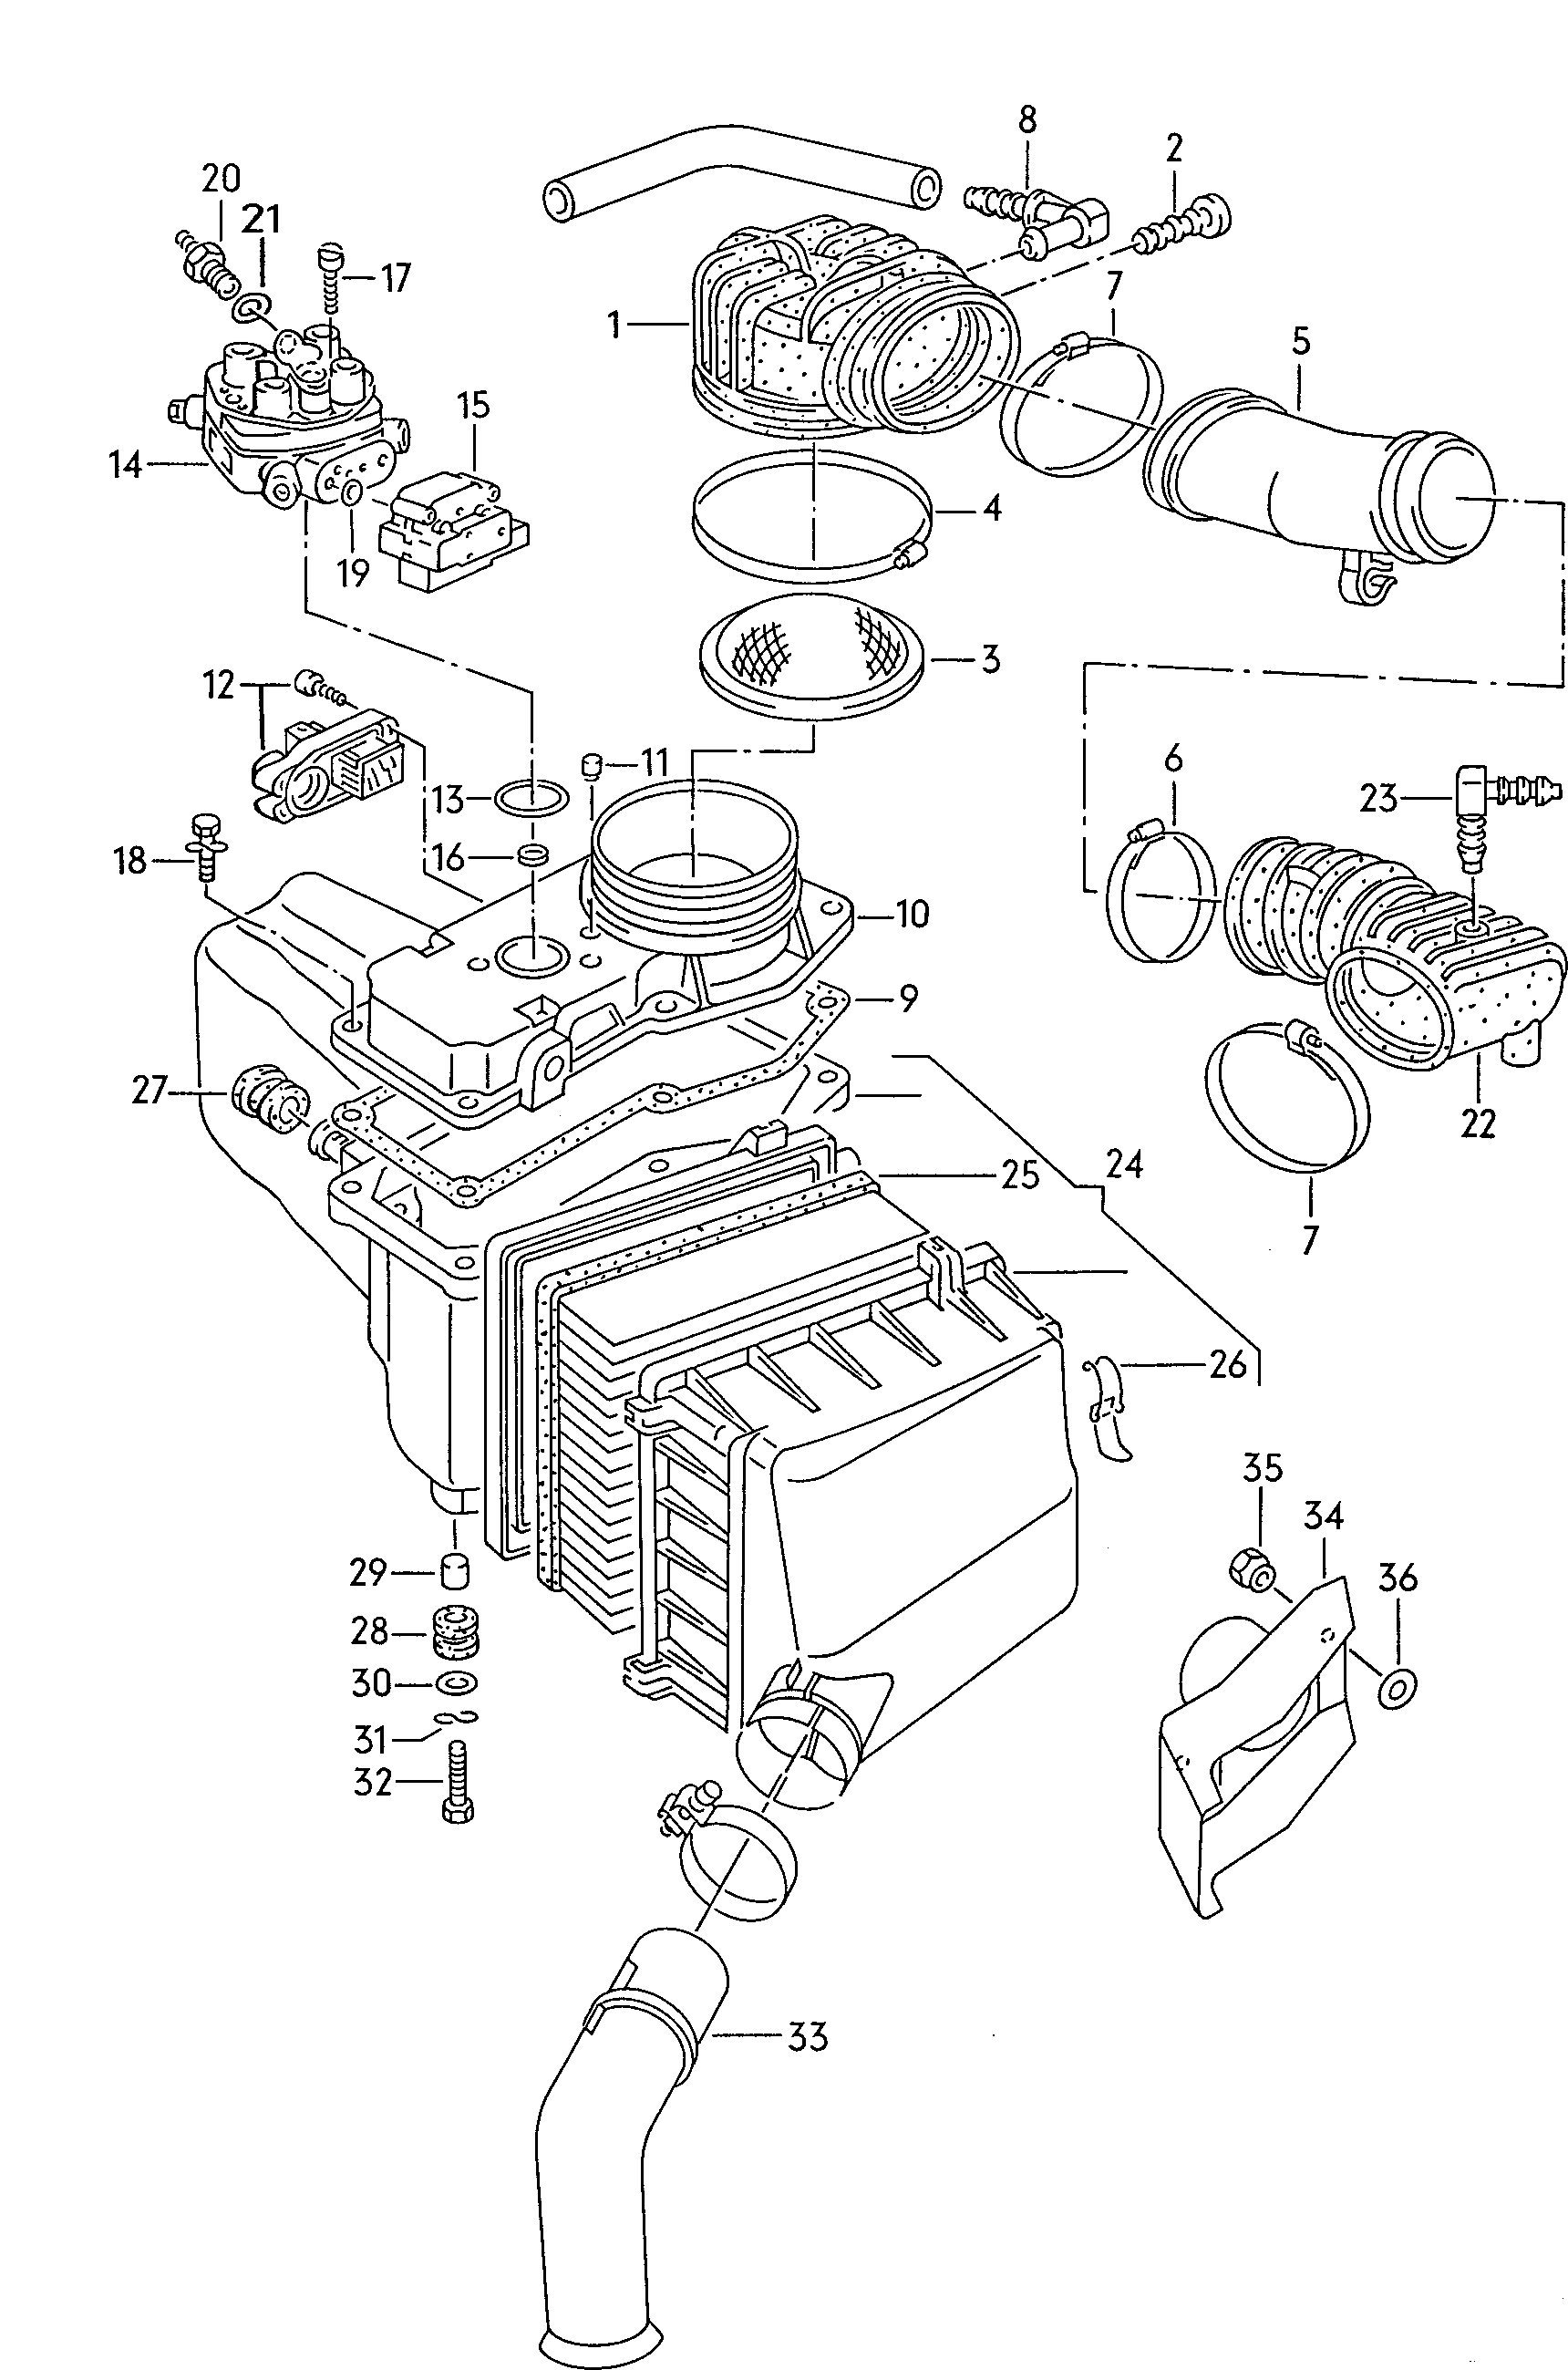 air flow meterfuel metering valveAir filter with connecting<br>parts 1.8ltr. - Audi 100/Avant - a100